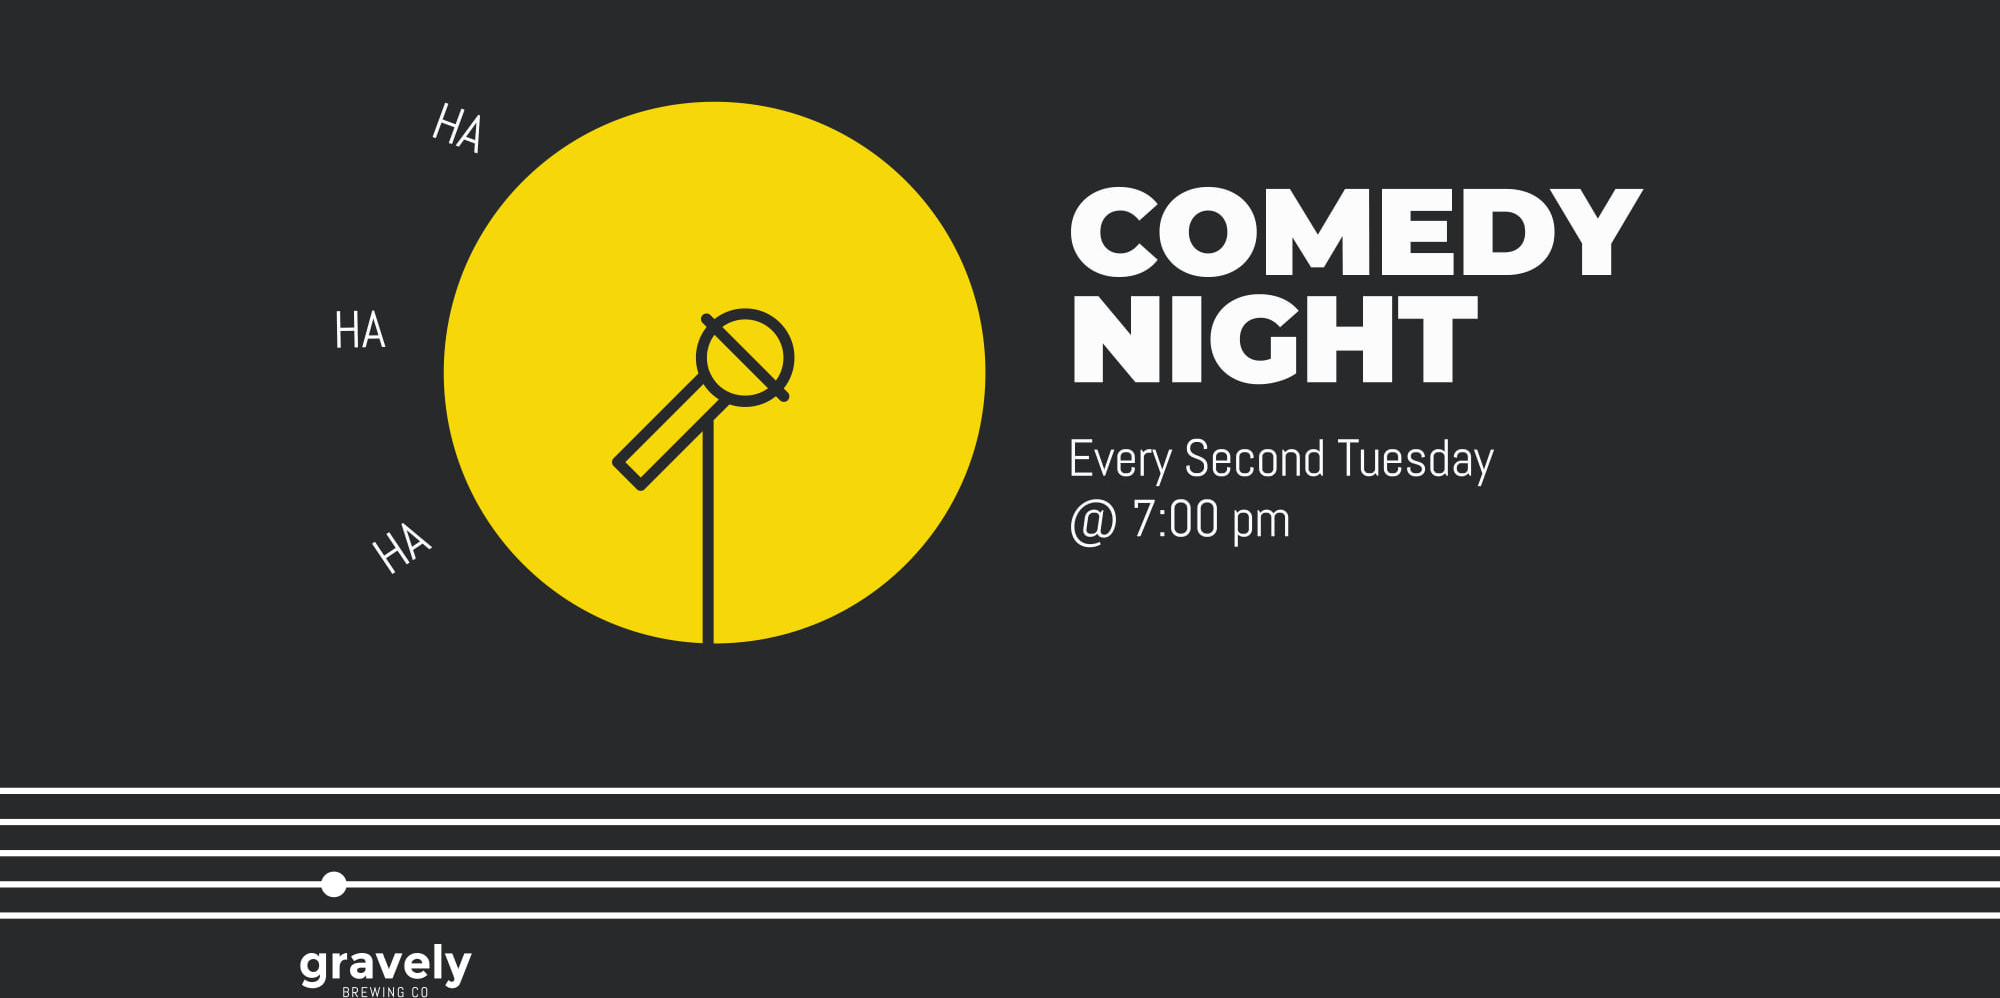 Comedy Night at Gravely Brewing Co promotional image